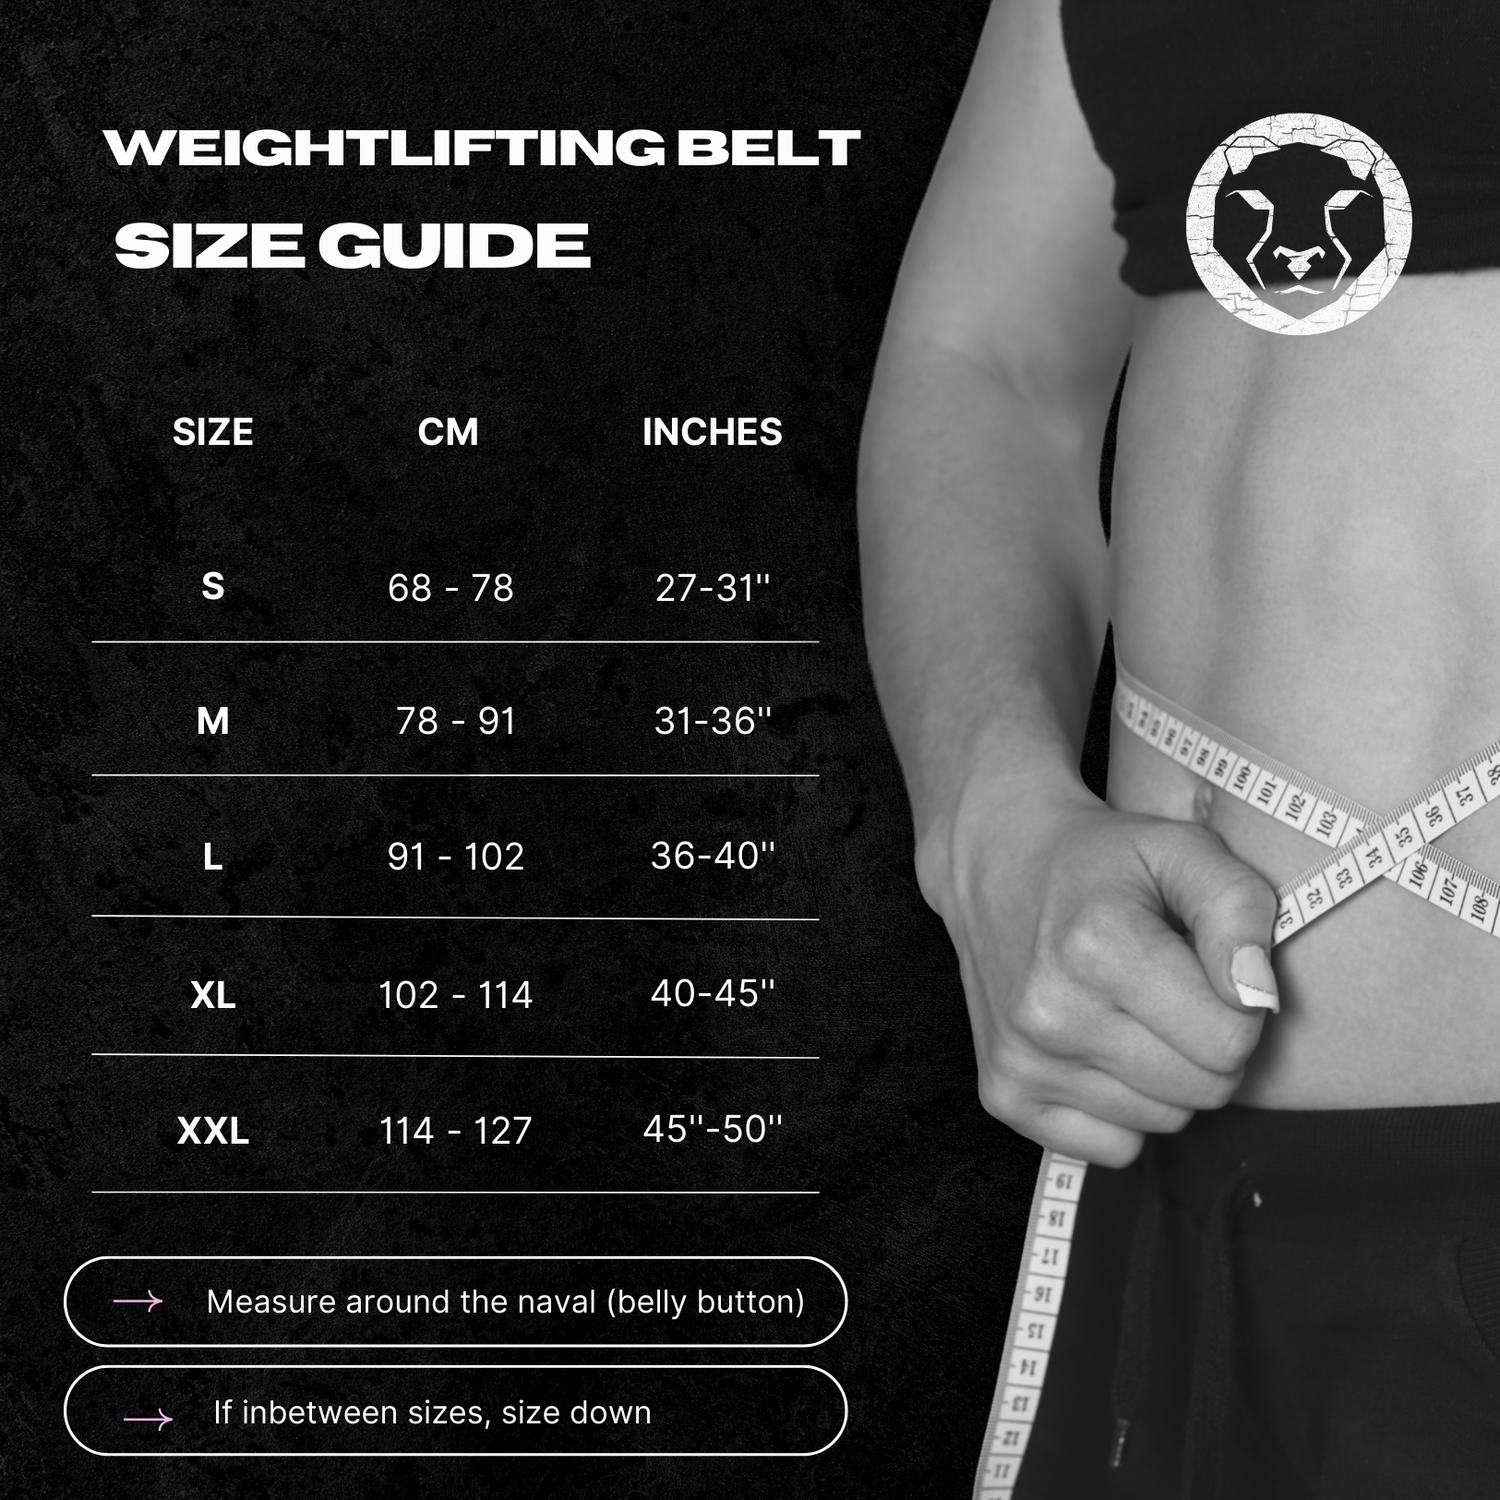 Durable Mammal Strength 4-inch Nylon Weightlifting Belt for secure core support during heavy lifts - size guide